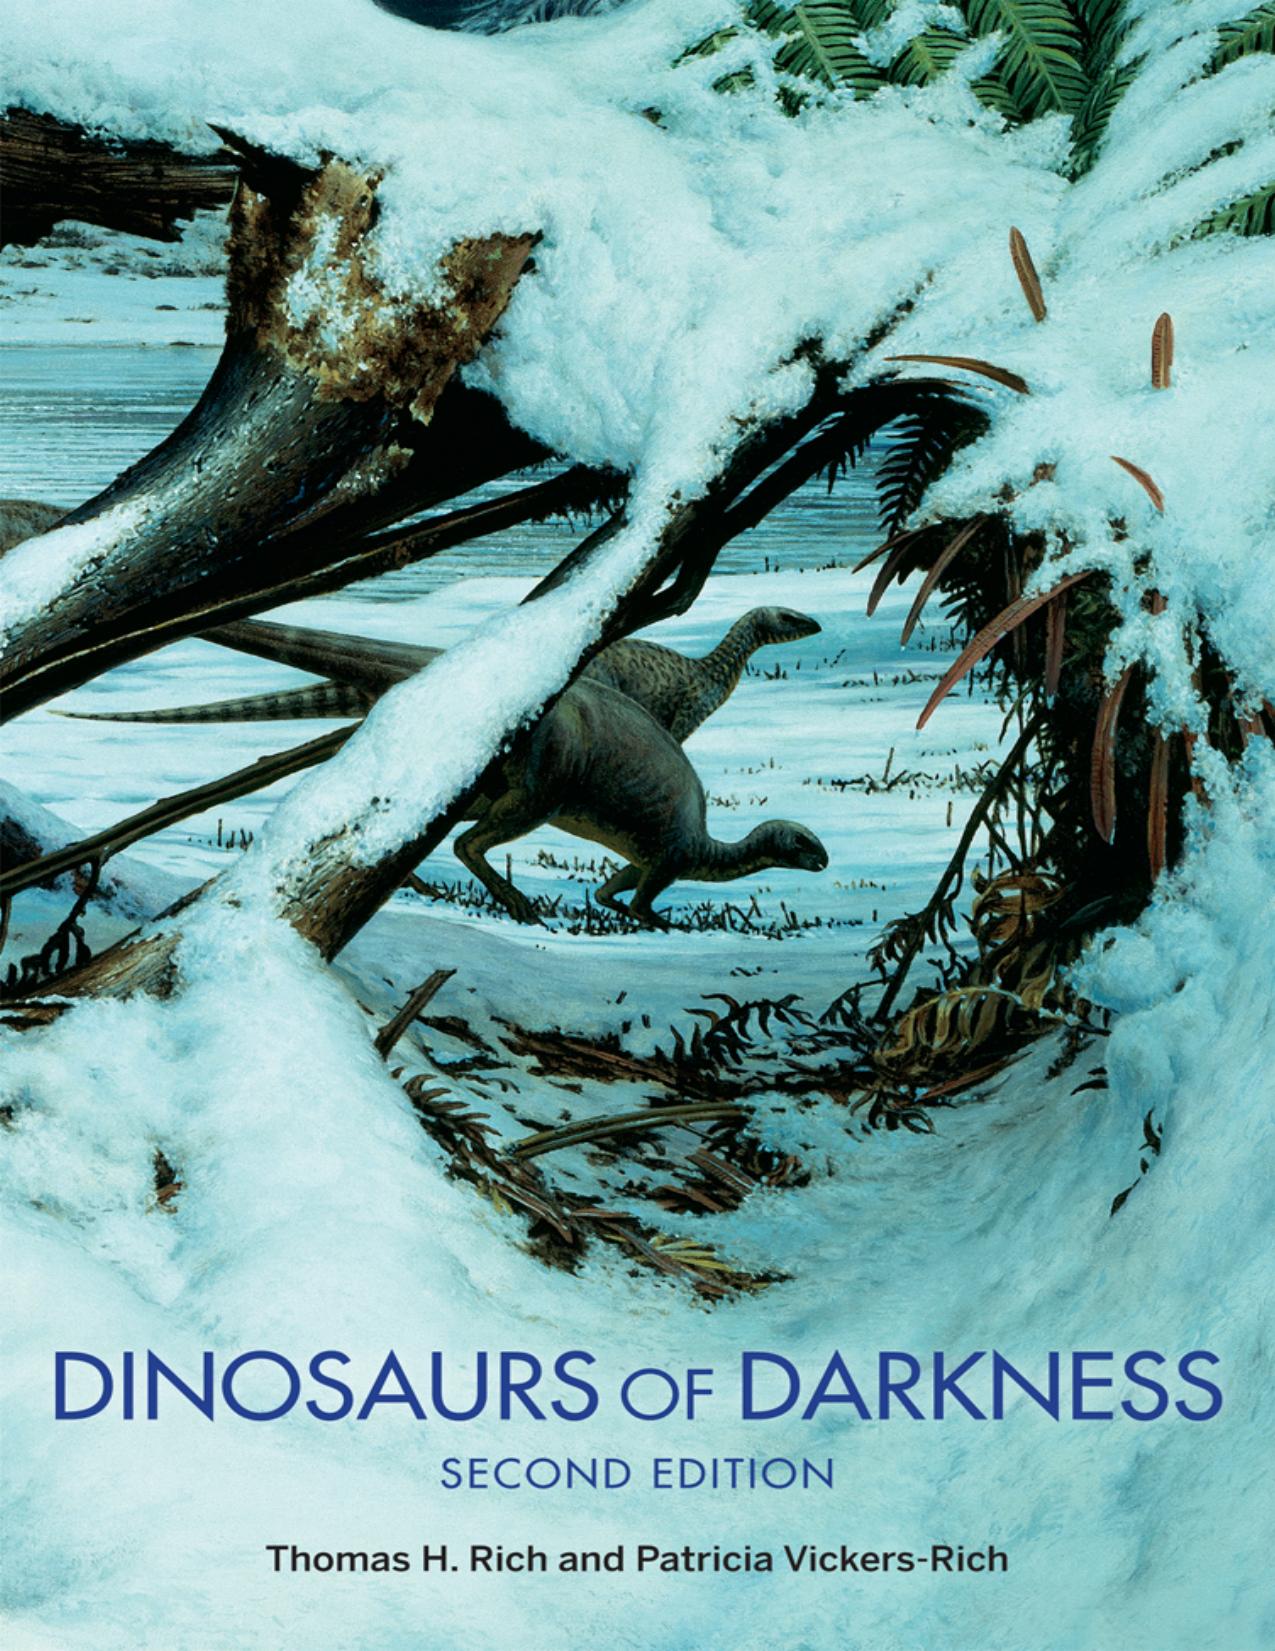 Dinosaurs of Darkness by Thomas H. Rich;Patricia Vickers-Rich;